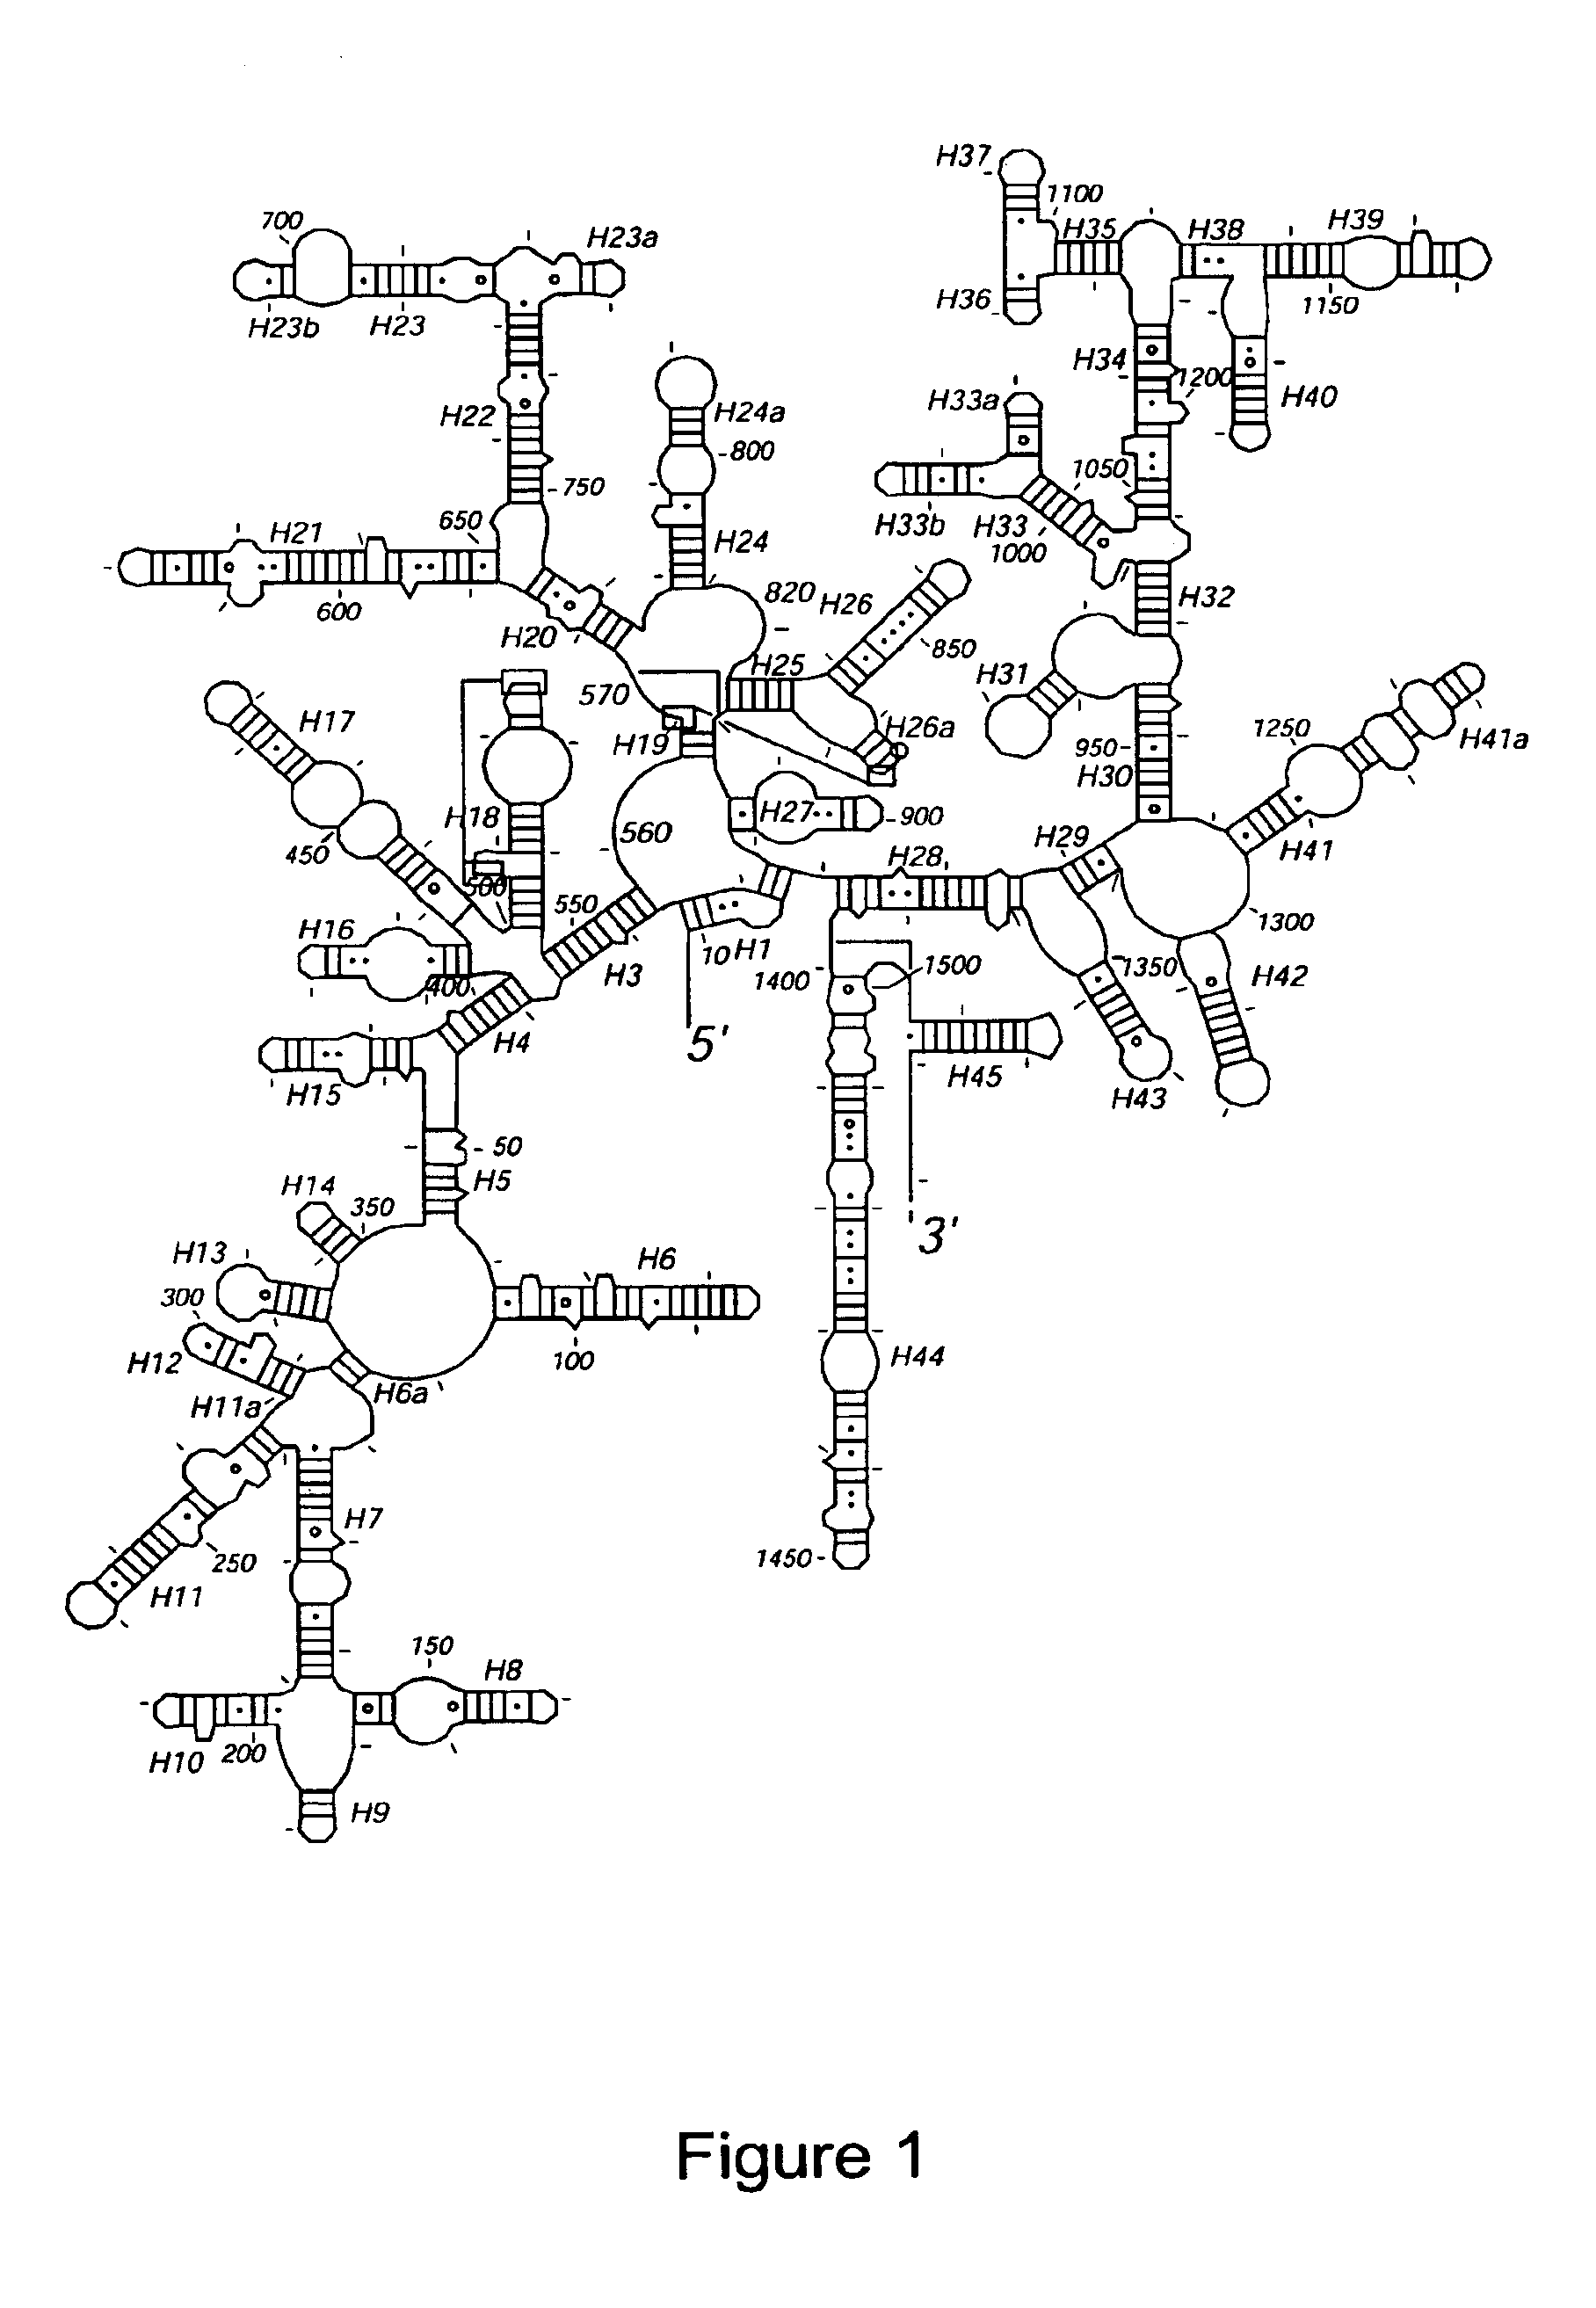 Crystal structure of the 30s ribosome